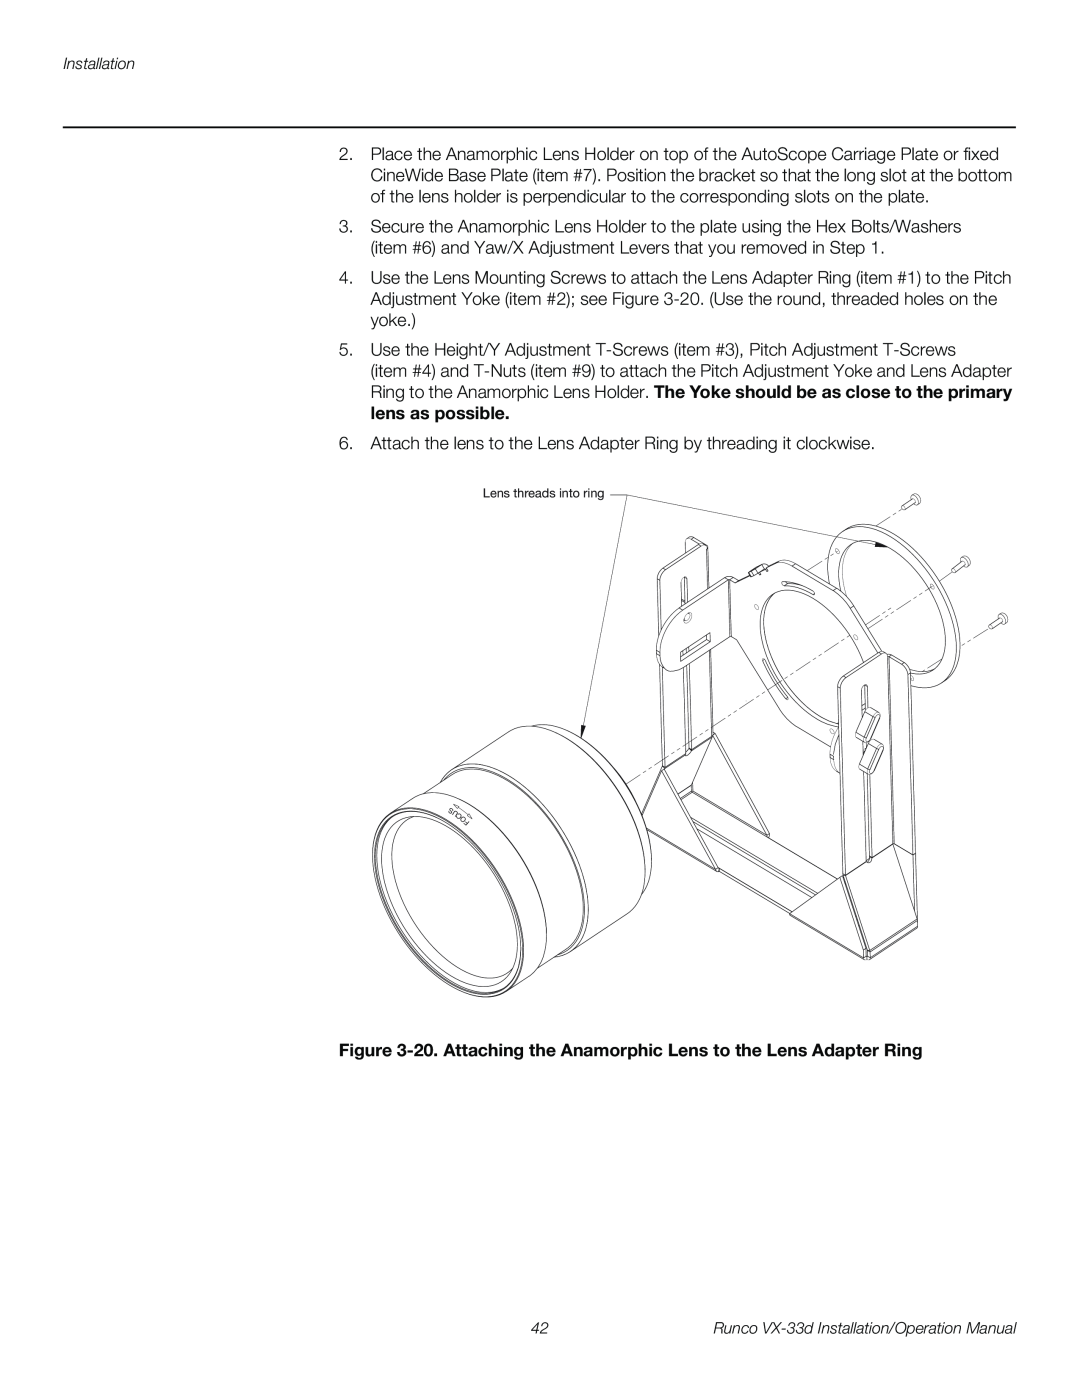 Runco VX-33D operation manual 20. Attaching the Anamorphic Lens to the Lens Adapter Ring 